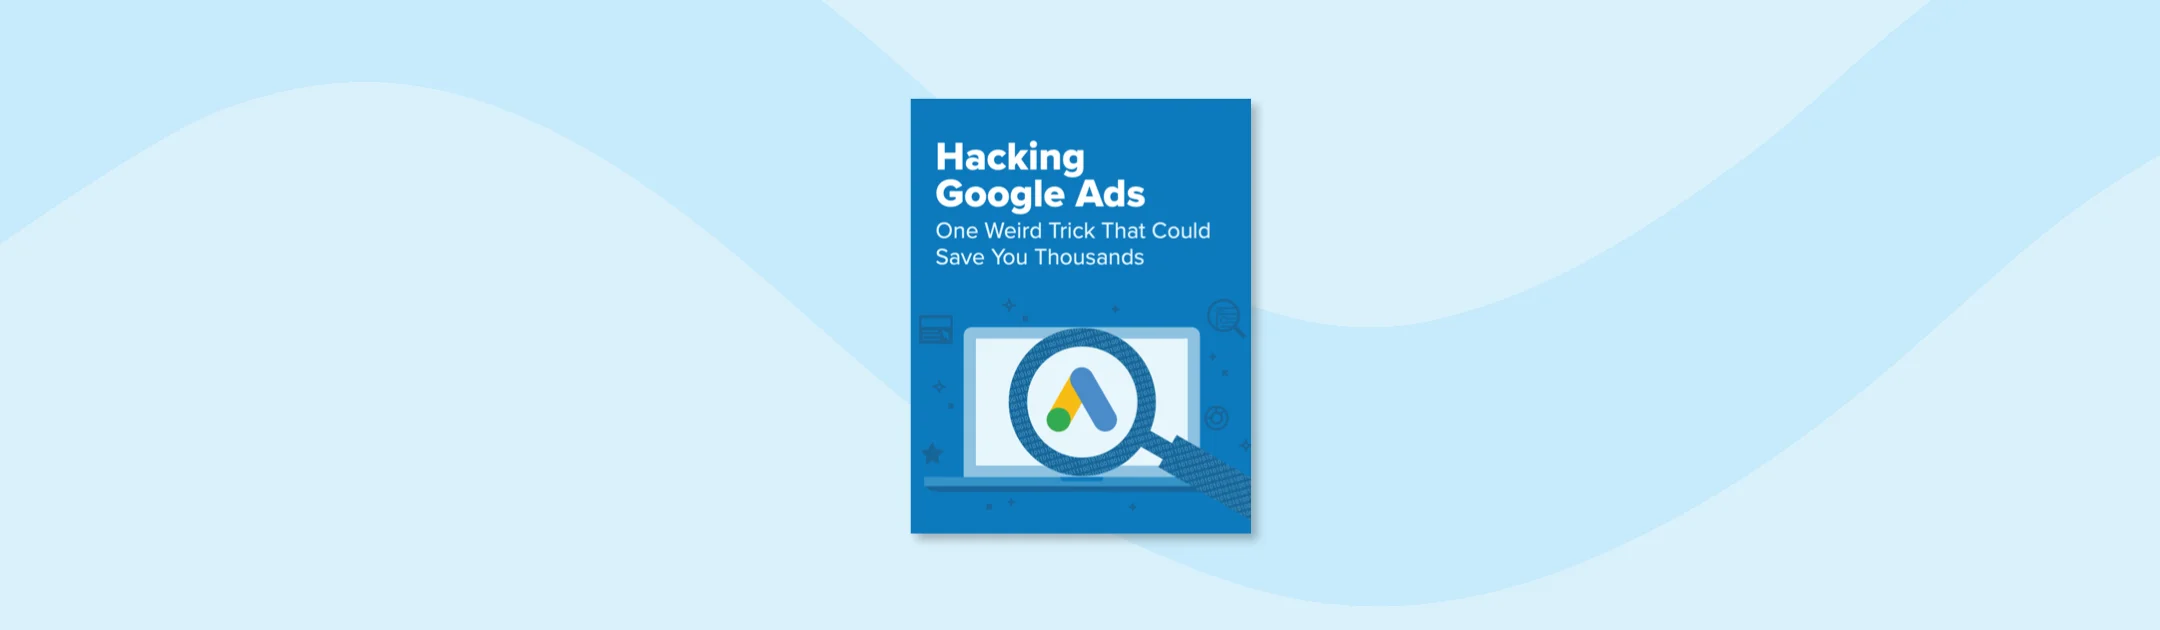 Hacking Google Ads: One Weird Trick That Could Save You Thousands